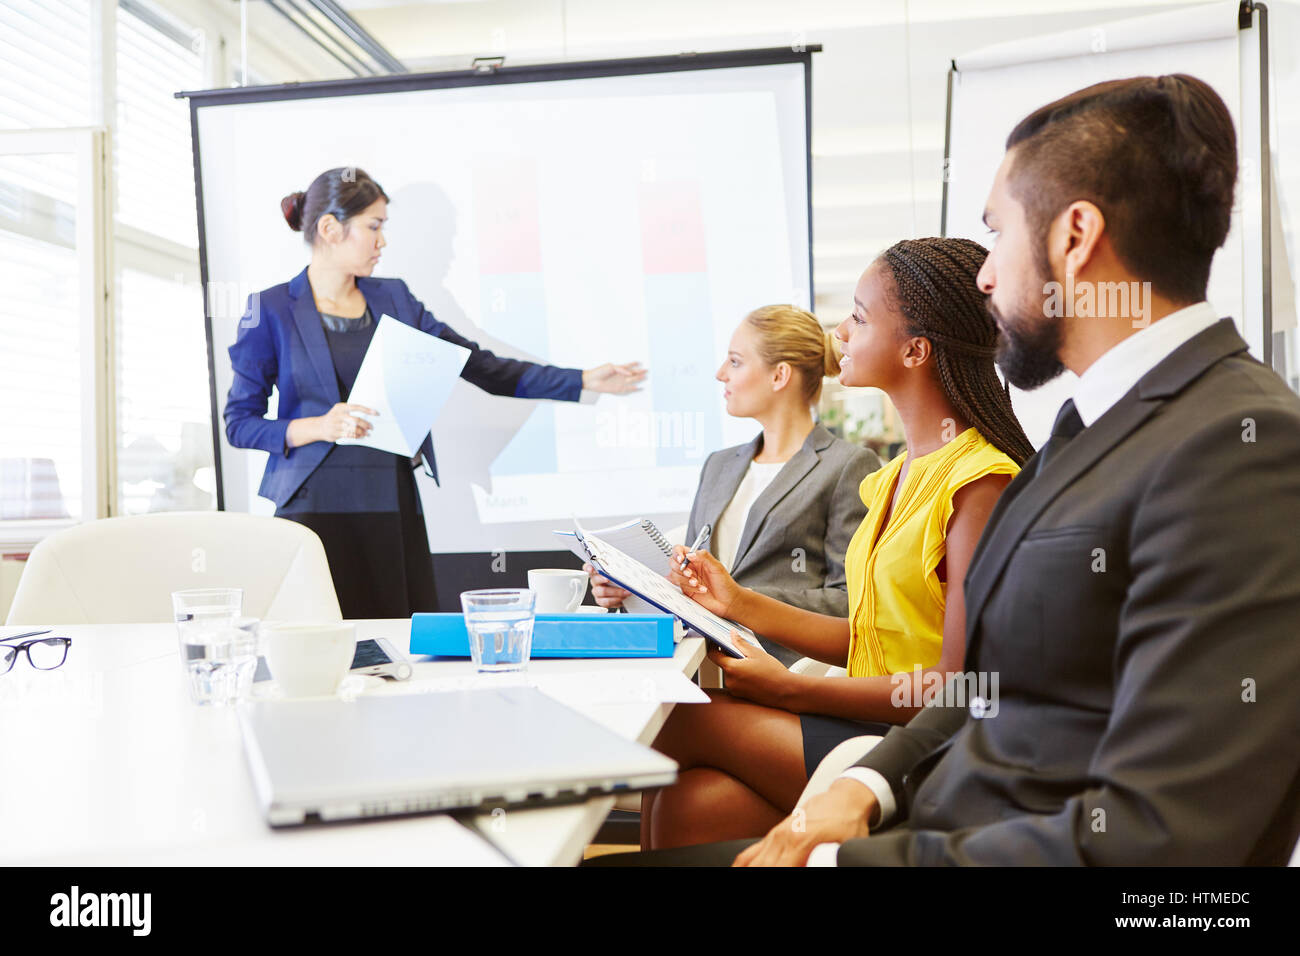 Woman as lecturer in business presentation with flipchart Stock Photo